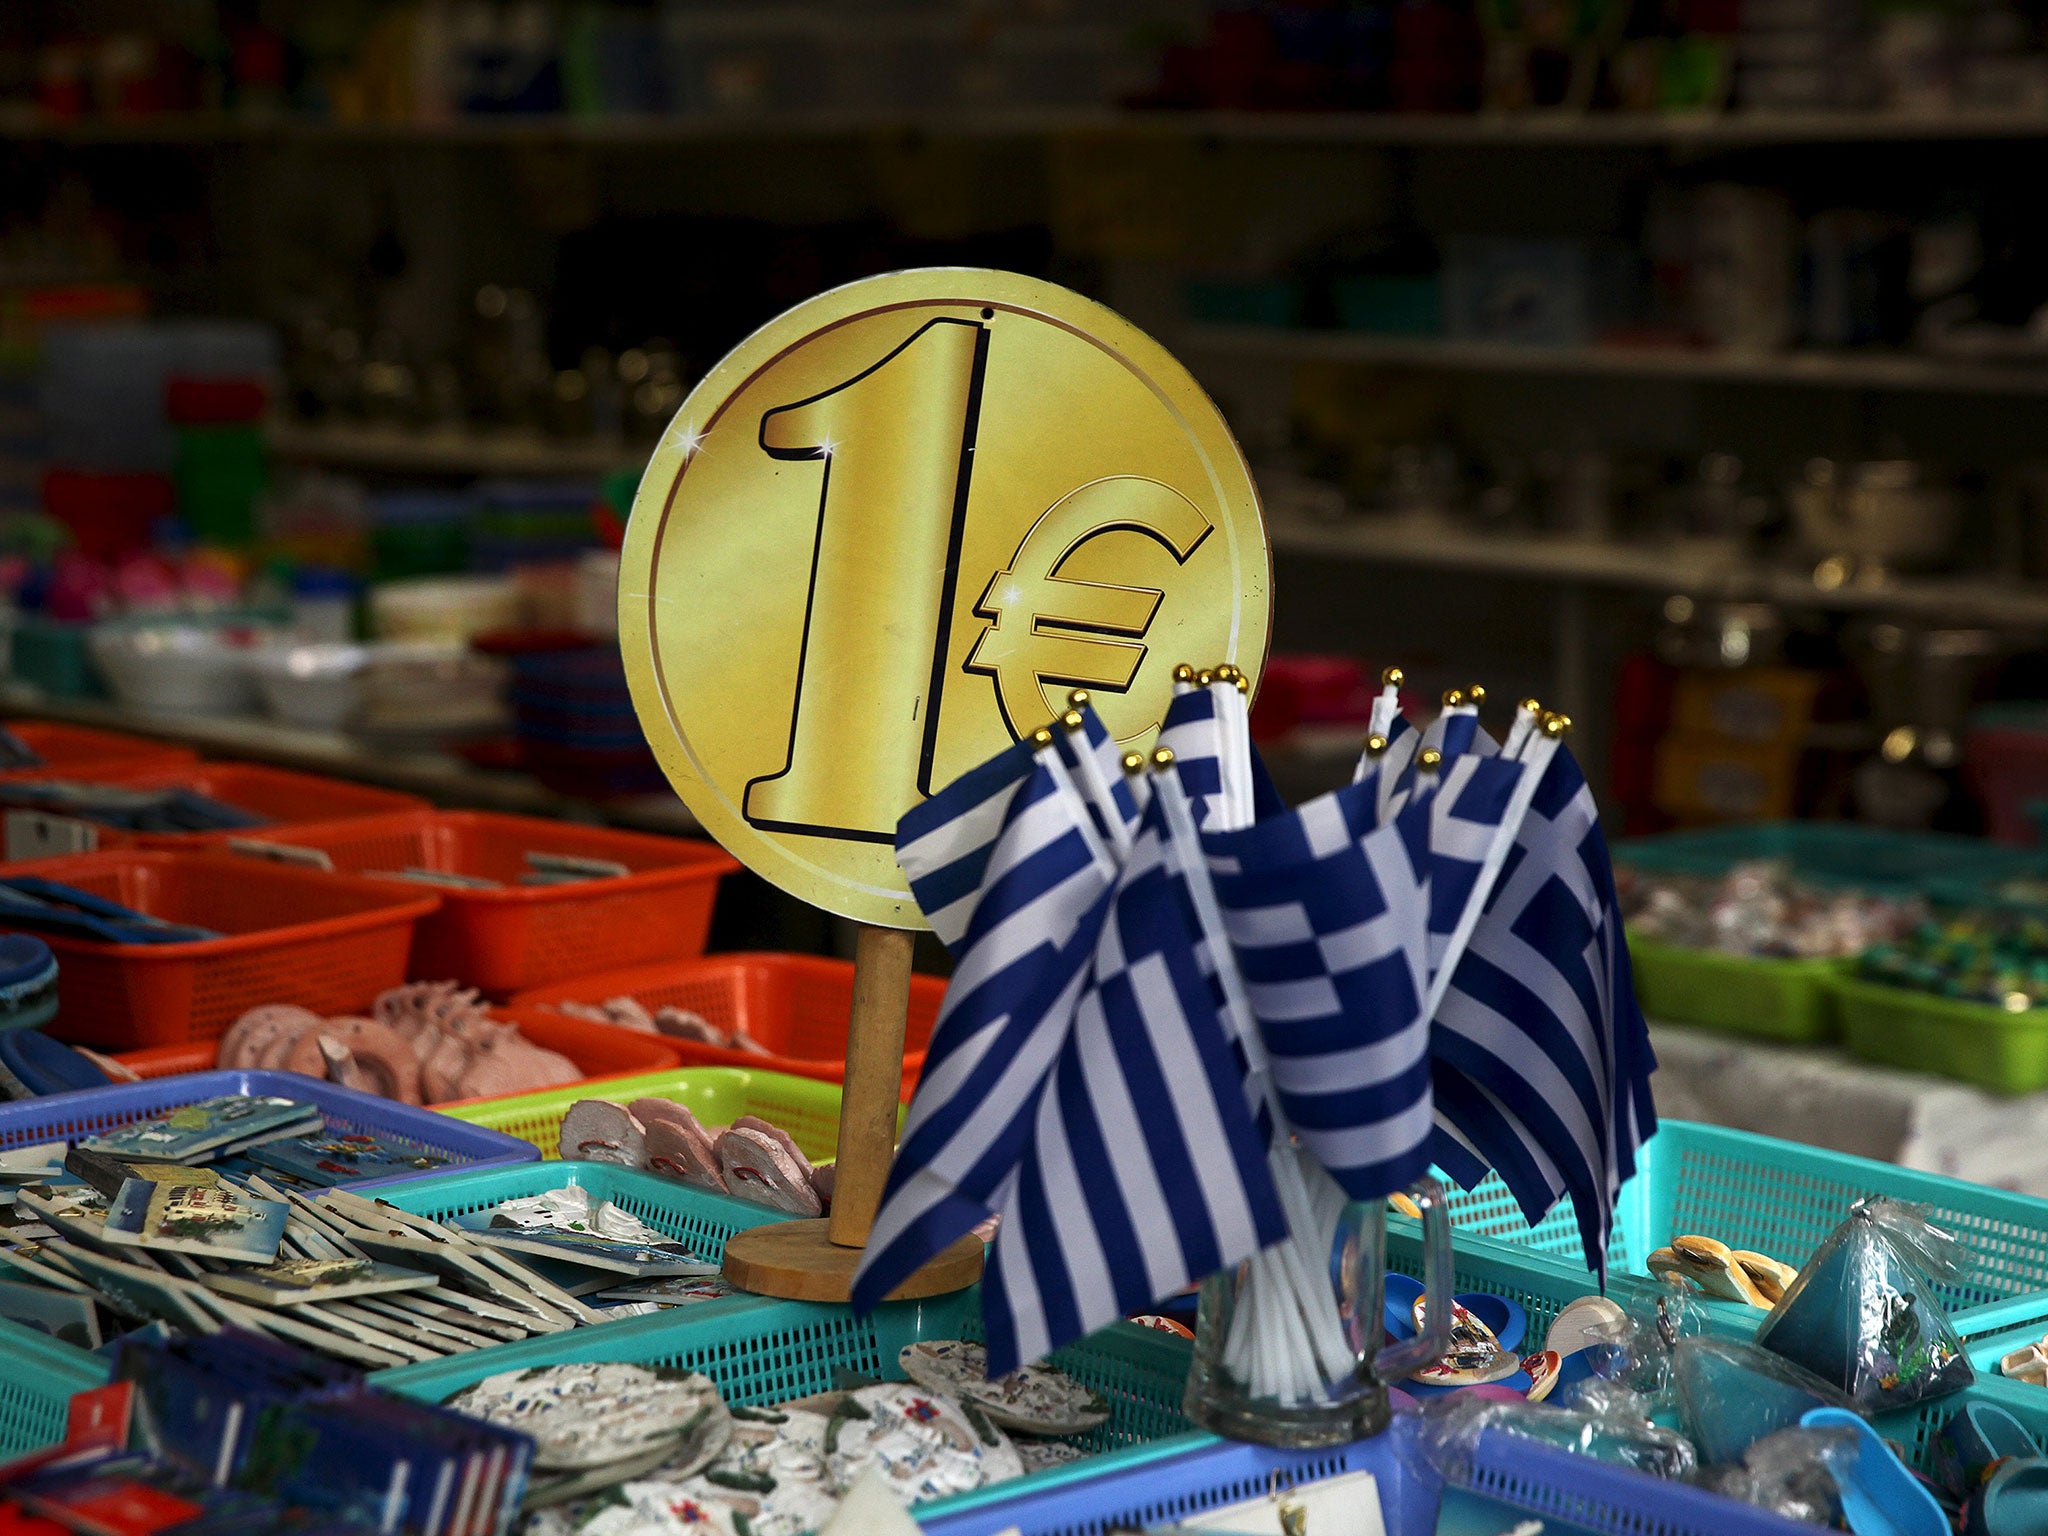 Greek flags for sale for one euro in Athens: capital controls are set to stay for months, while talks on a third bailout begin today